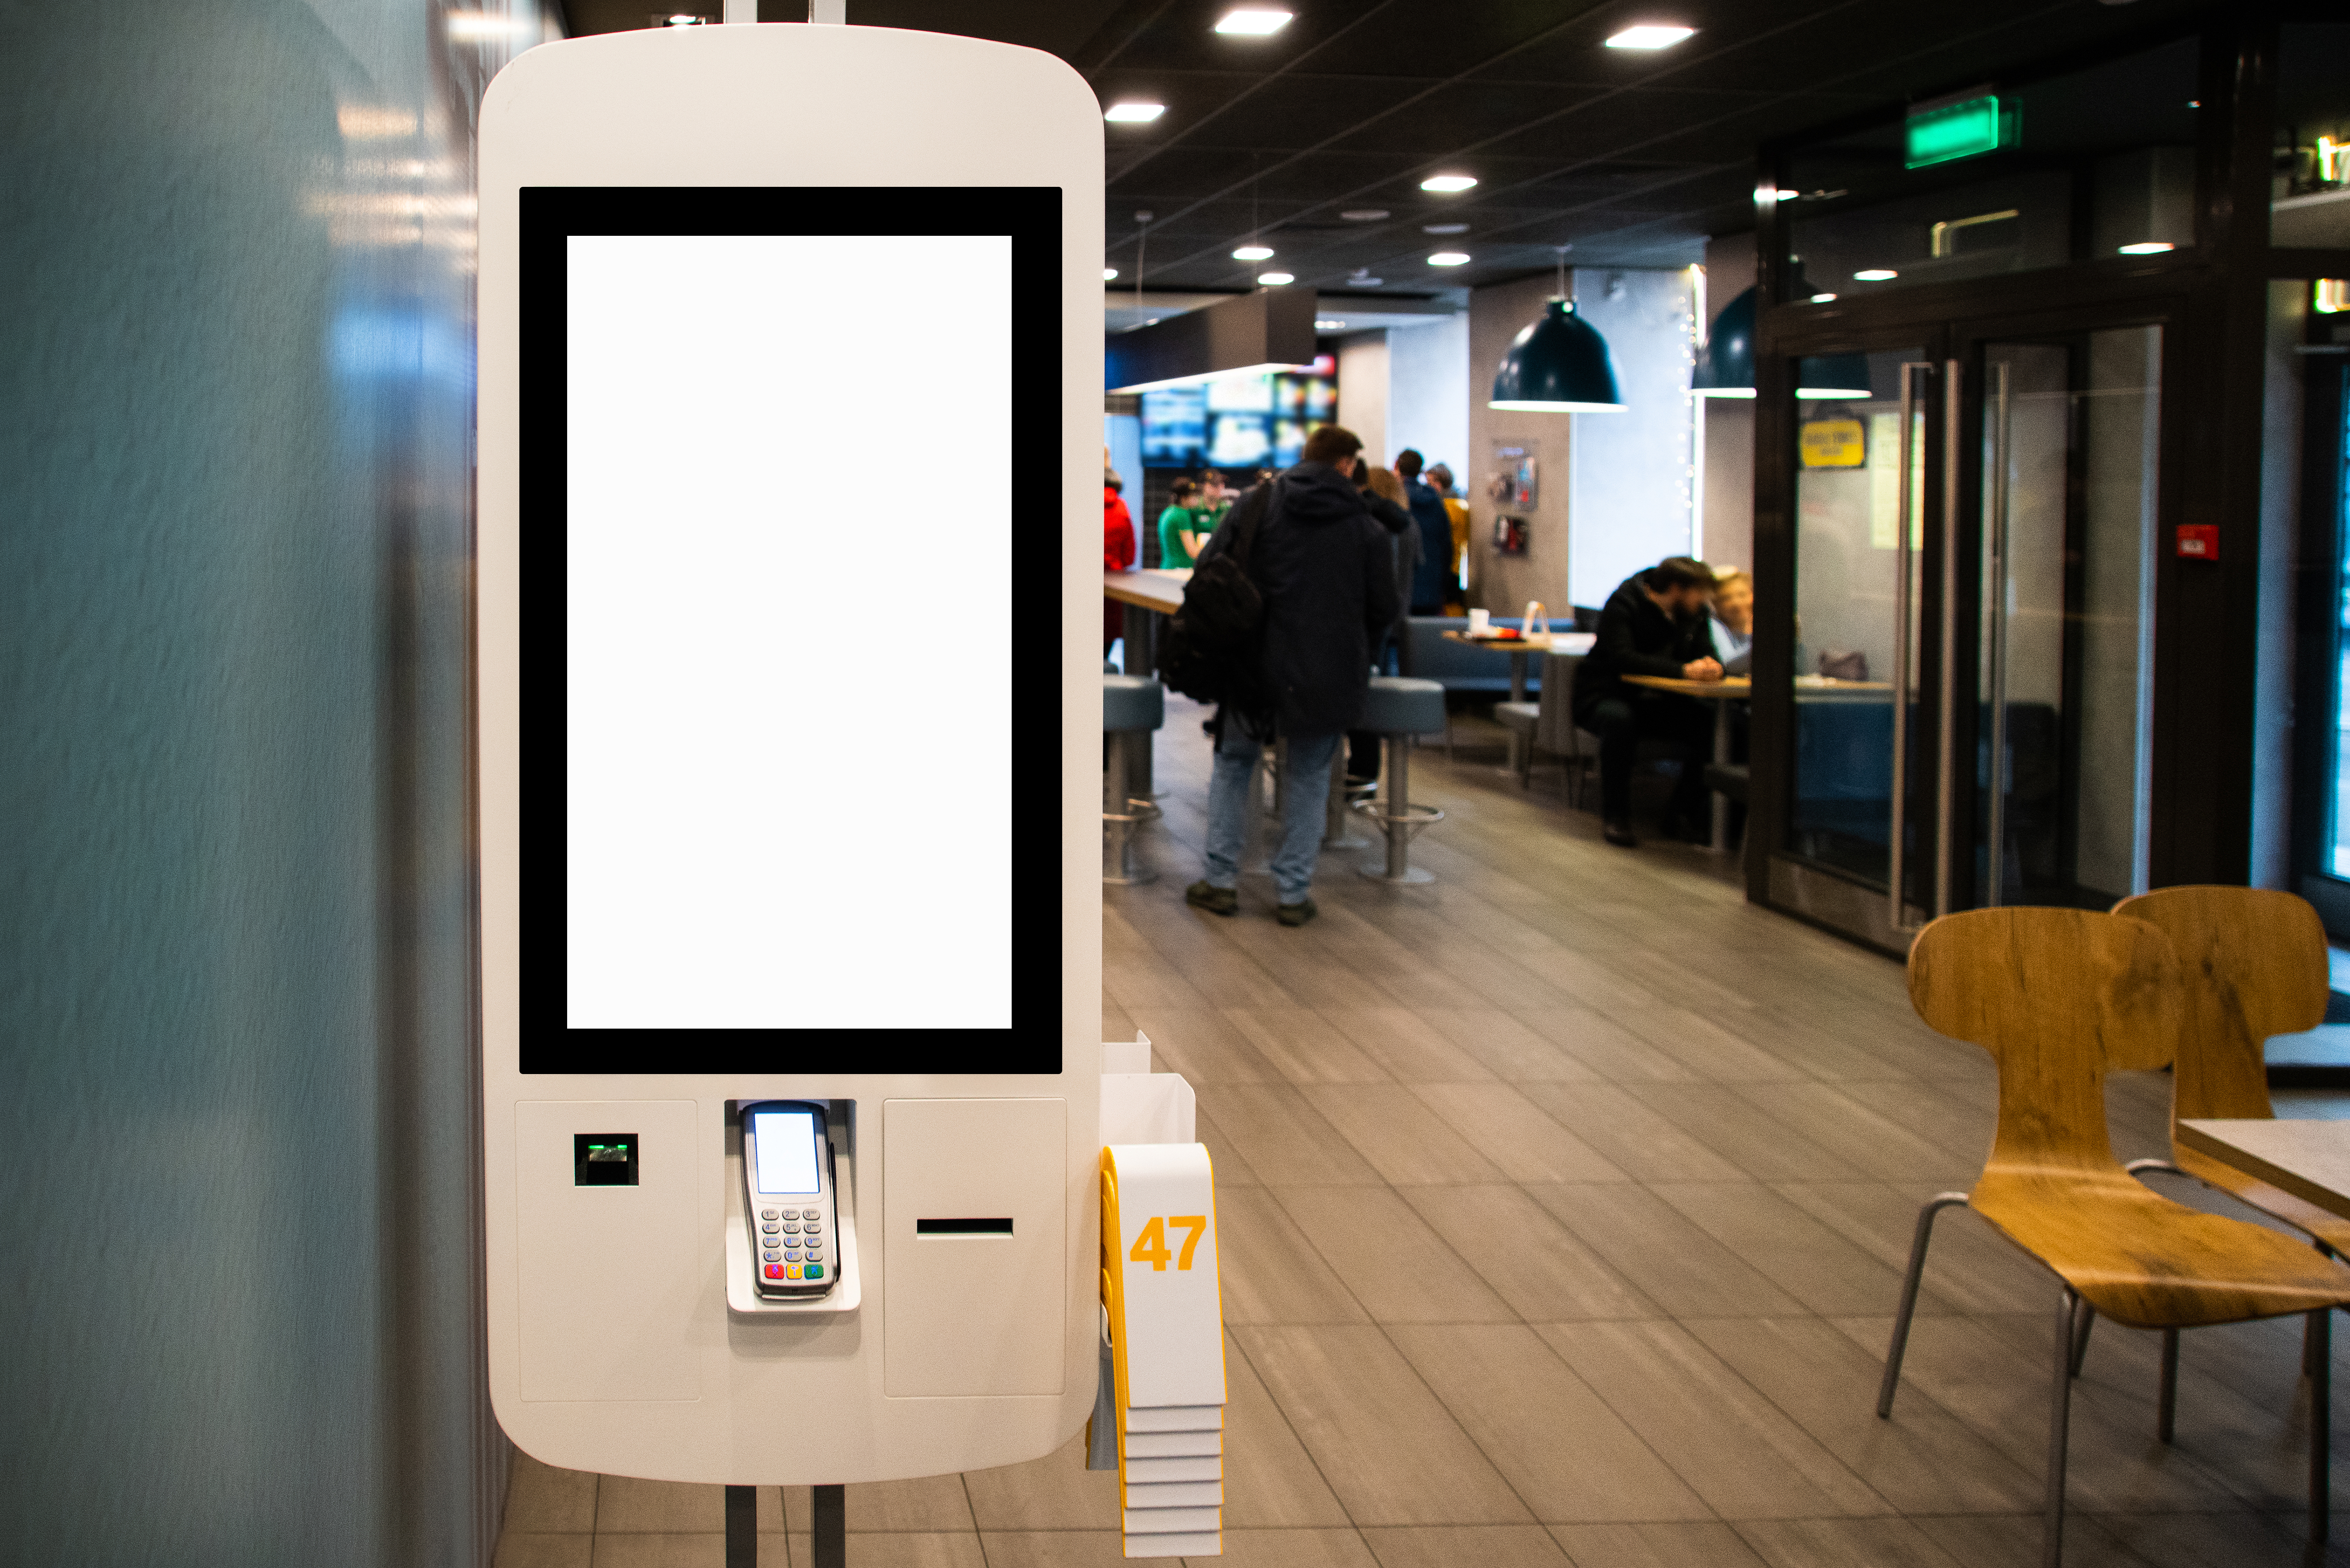 Capitalize on the Opportunity to Sell Retail Self-Service Kiosks